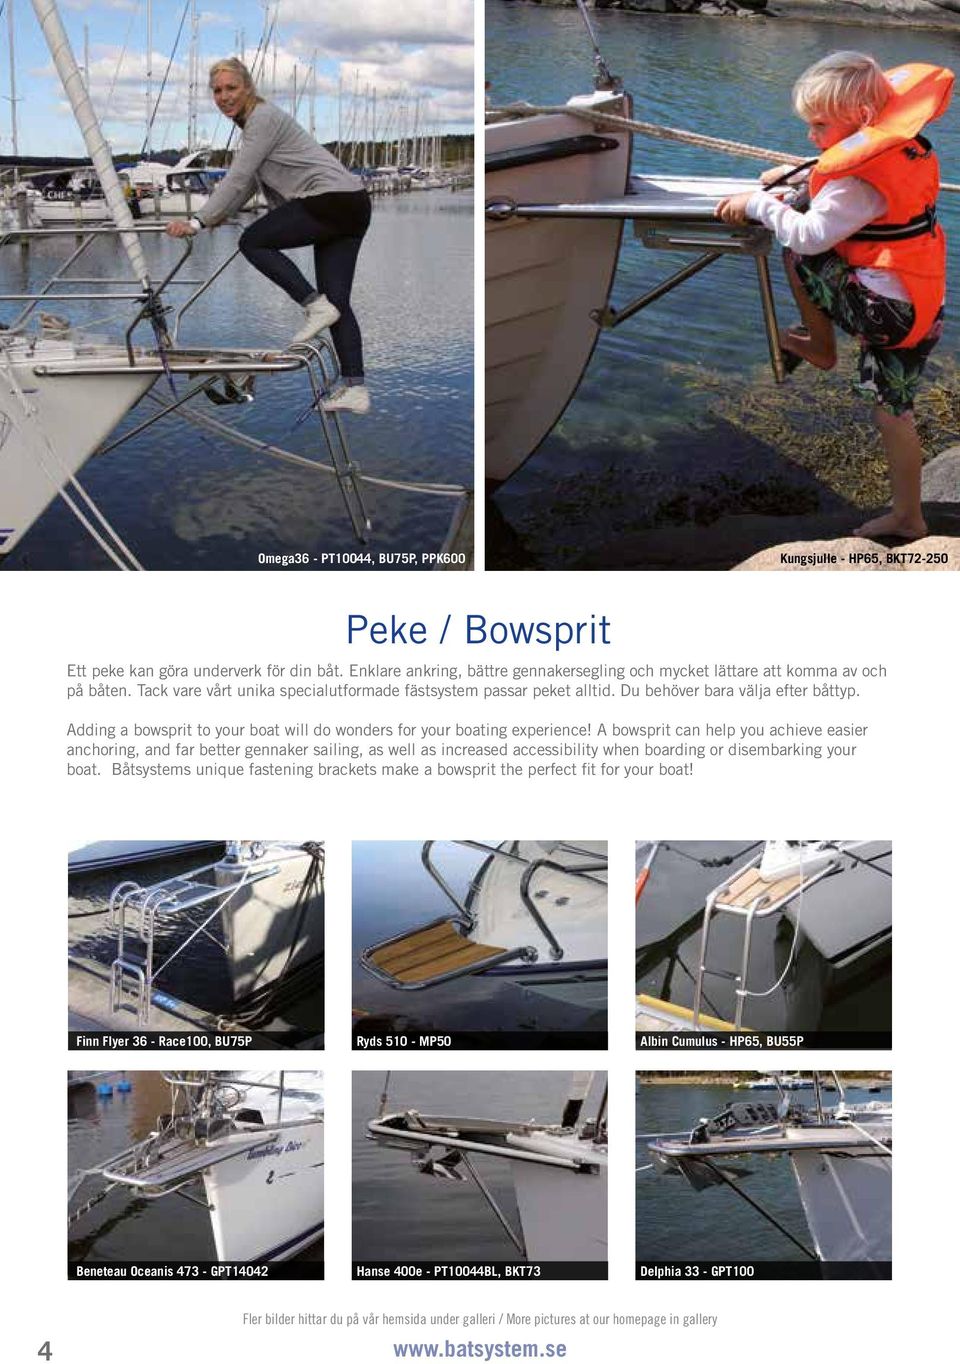 A bowsprit can help you achieve easier anchoring, and far better gennaker sailing, as well as increased accessibility when boarding or disembarking your boat.